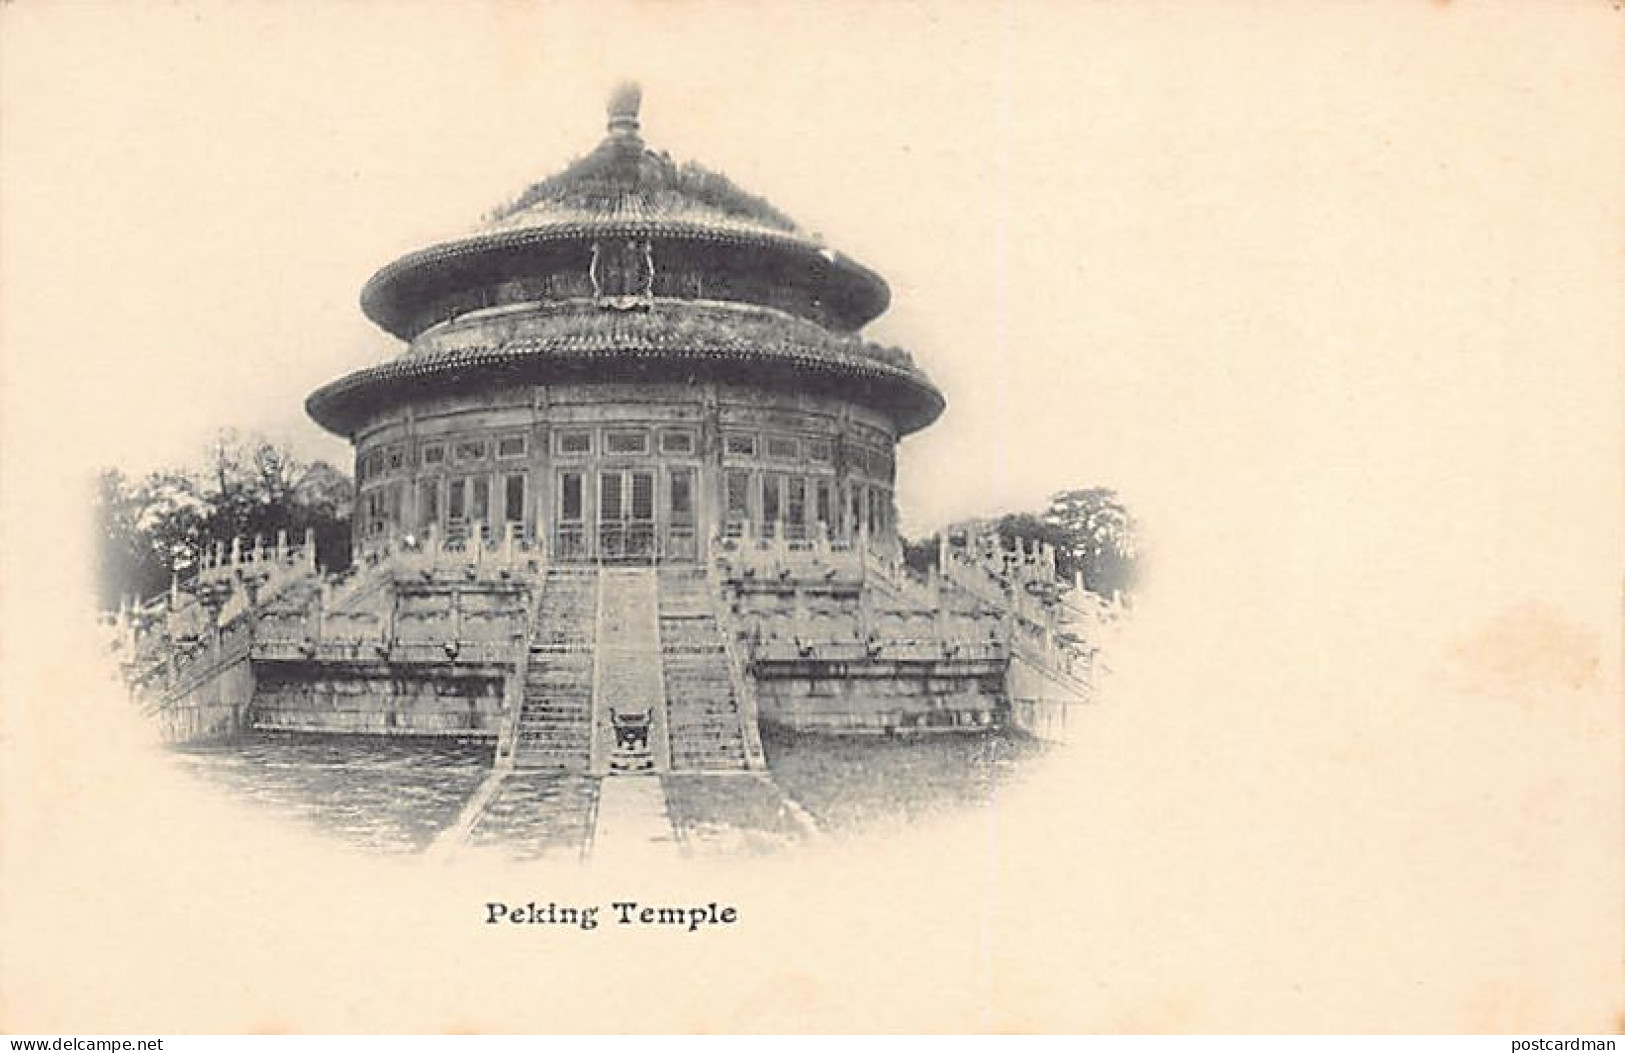 China - BEIJING - Peking Temple - Publ. Unknown  - China